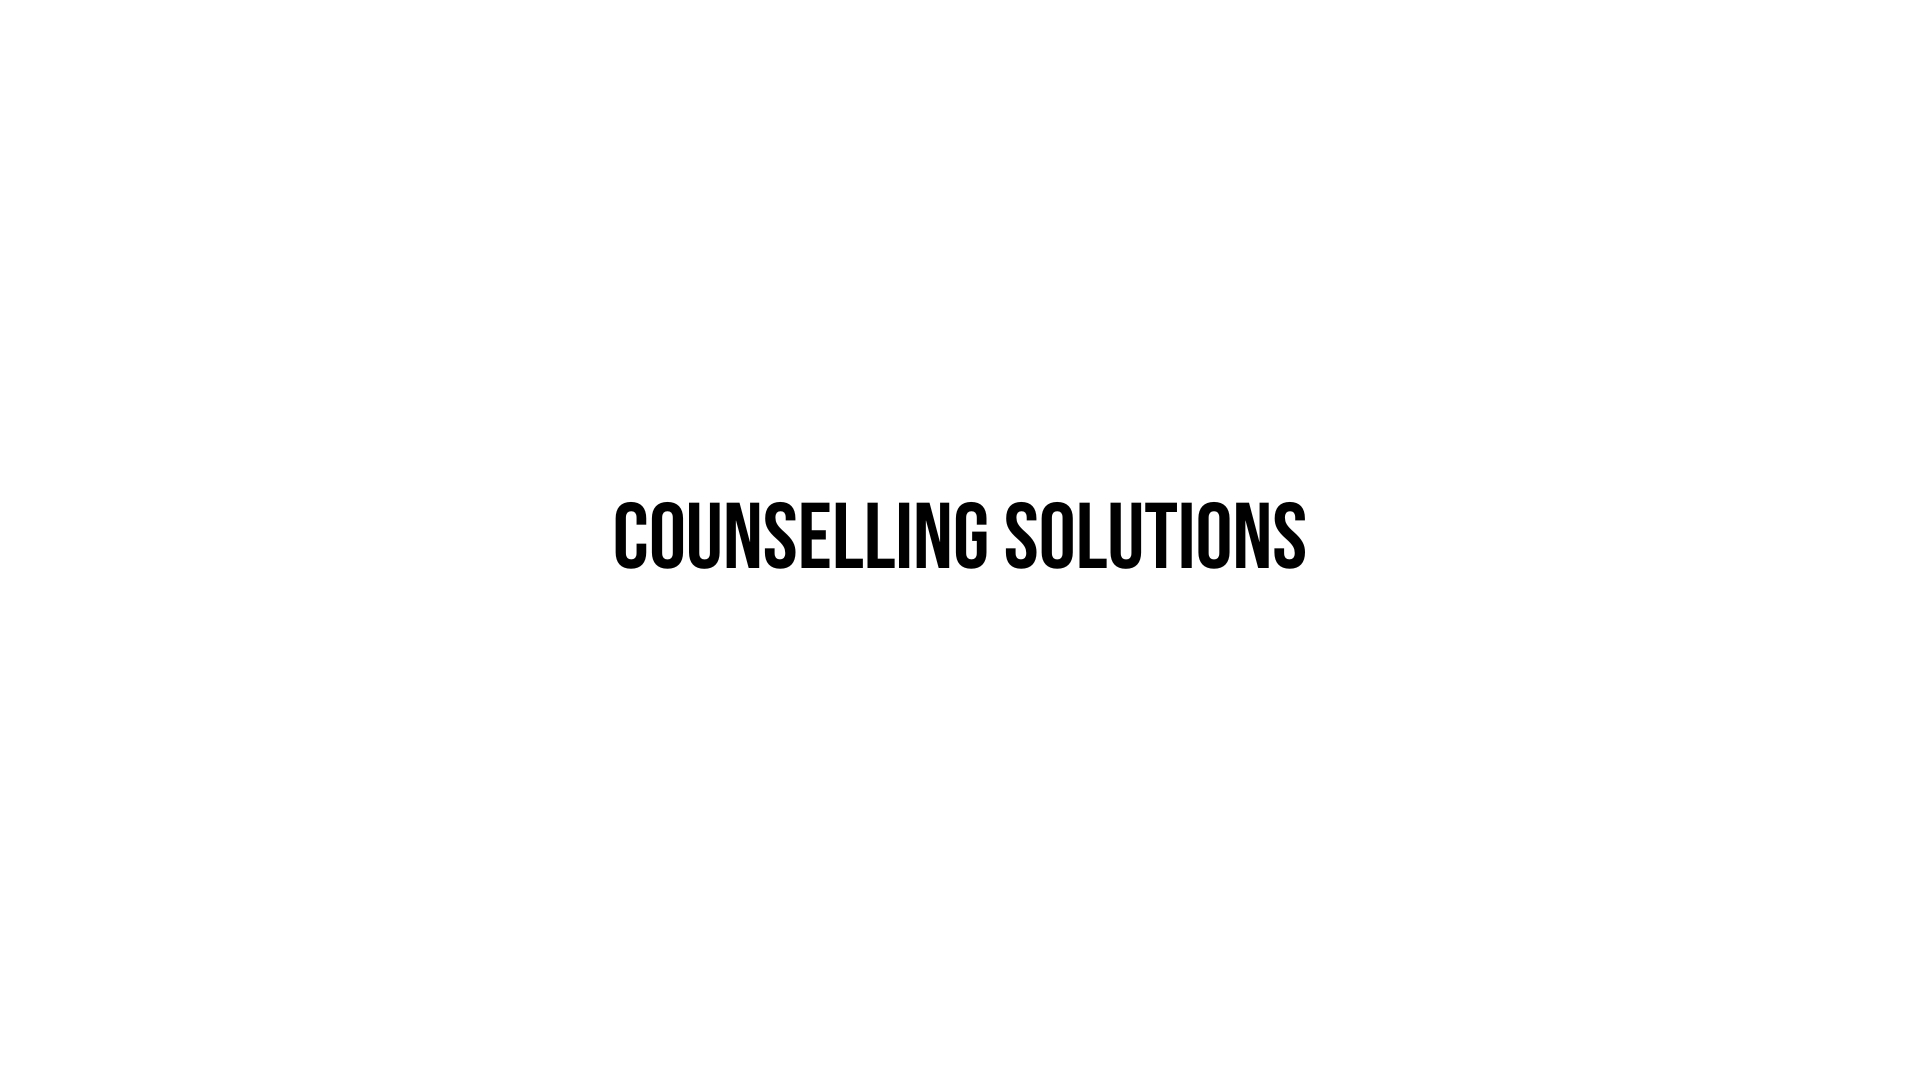 Timmins Care Text "counselling solutions" centered in an image with a plain white background. Cochrane District Social Services Administration Board